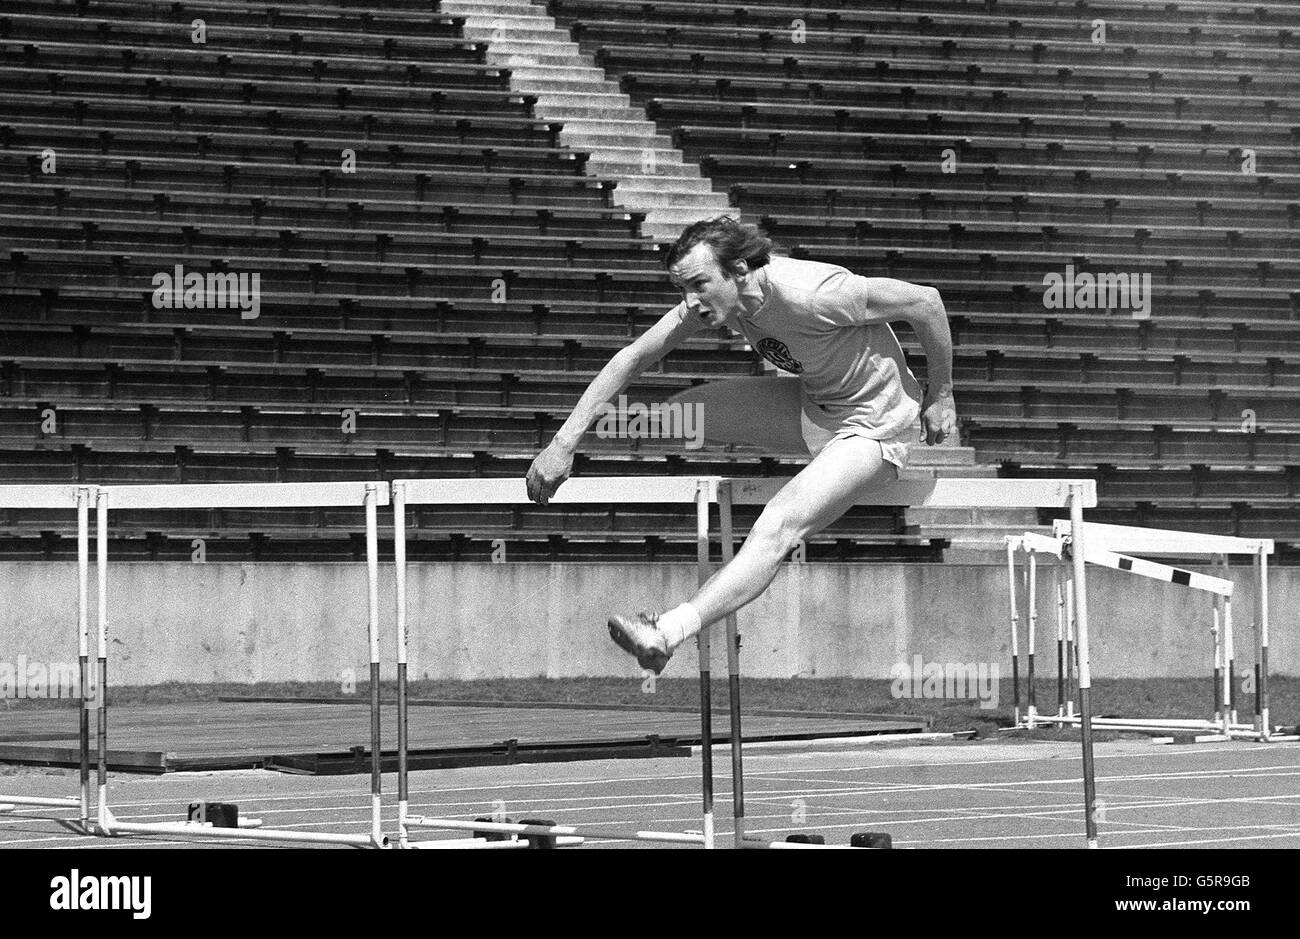 Pictured in flight is Alan Pascoe, 23, the Polytechnic Harriers hurdler, Britain's hope for the 110 metres high hurdles at the European Championships. Stock Photo